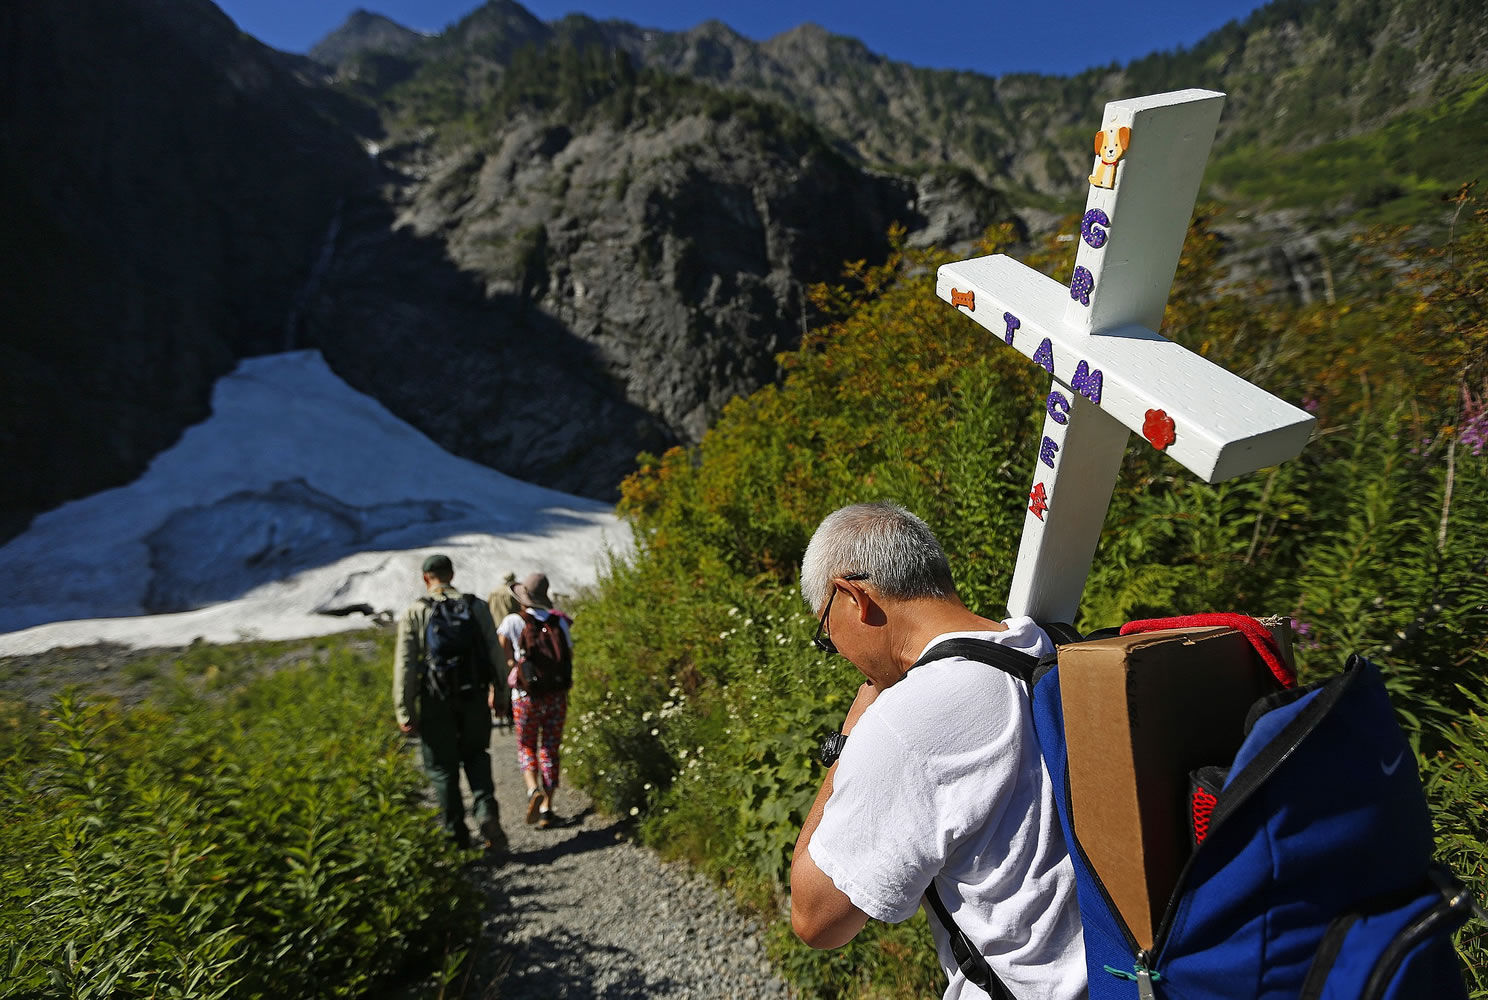 John Tam carries a cross bearing the name of his daughter, Grace, as he hikes the mile to the Big Four ice caves Thursday in Verlot, where Grace, 11, died July 31, 2010, from internal injuries after a piece of ice fell on her. Tam tried to auger the cross into the ground but the rocky spot was too stubborn; he plans to return another day to finish the job. One lavender cross already marks the spot.